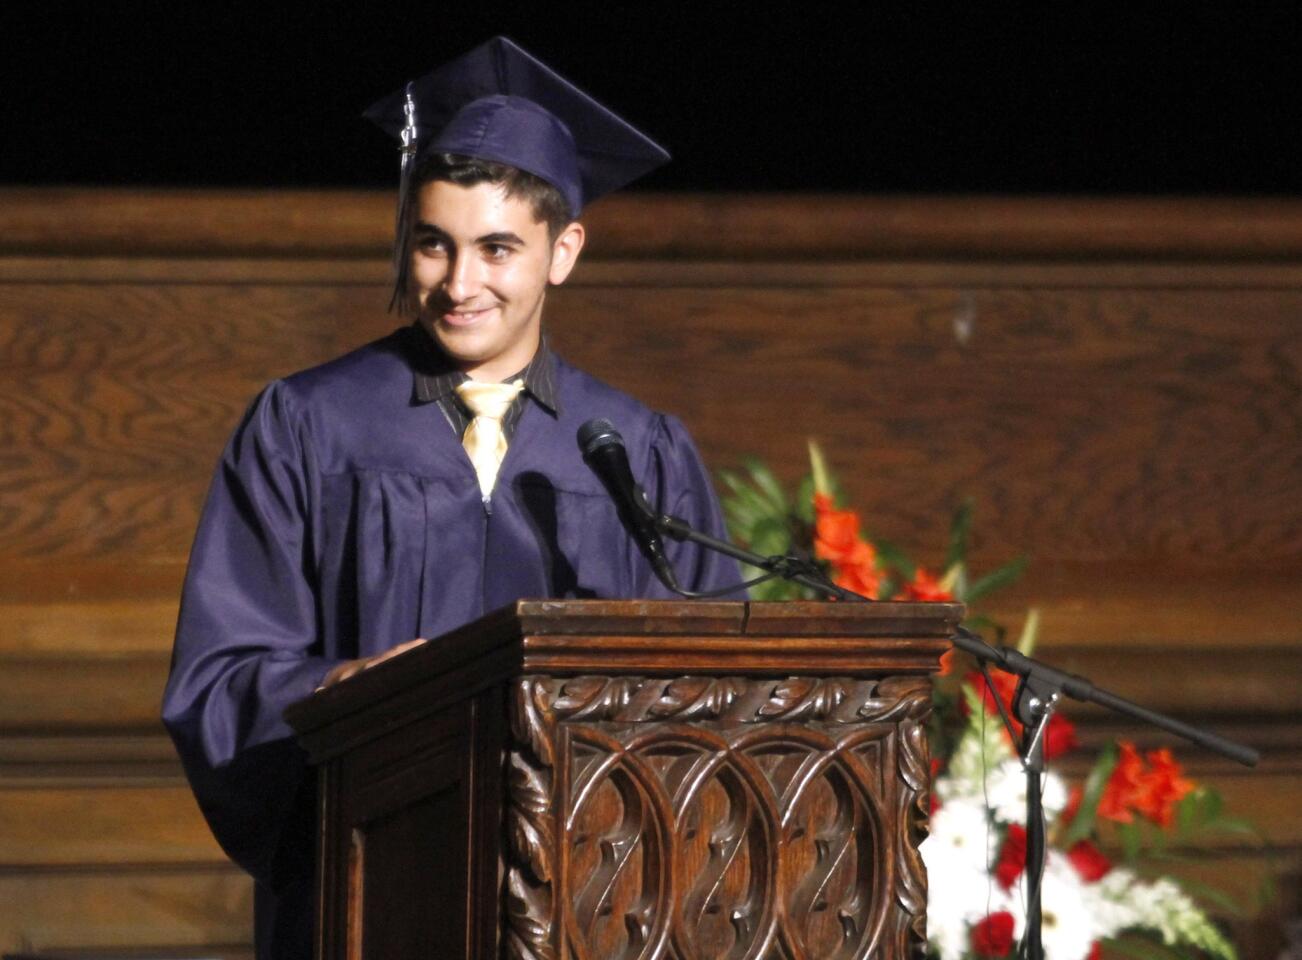 Daily High School grad Michael Dilanyan spoke during Commencement Ceremony for Verdugo Academy, Daily High School and Re-Connected Glendale at Forest Lawn Auditorium in Glendale on Tuesday, June 3, 2014.